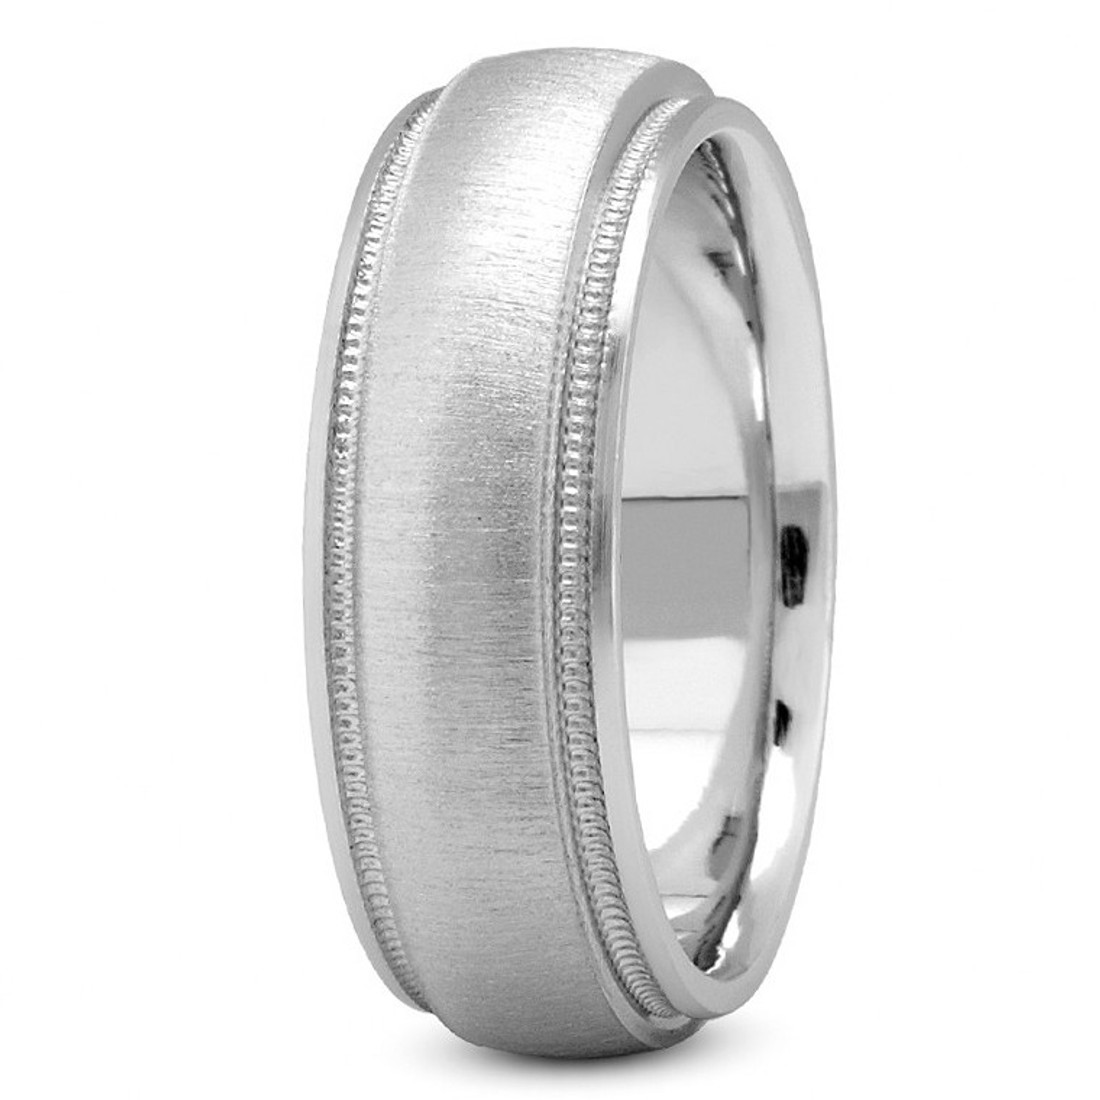 Platinum Wedding Band with Hammered Finish, 5mm Wide, Rustic Wedding Ring :  Amazon.co.uk: Handmade Products